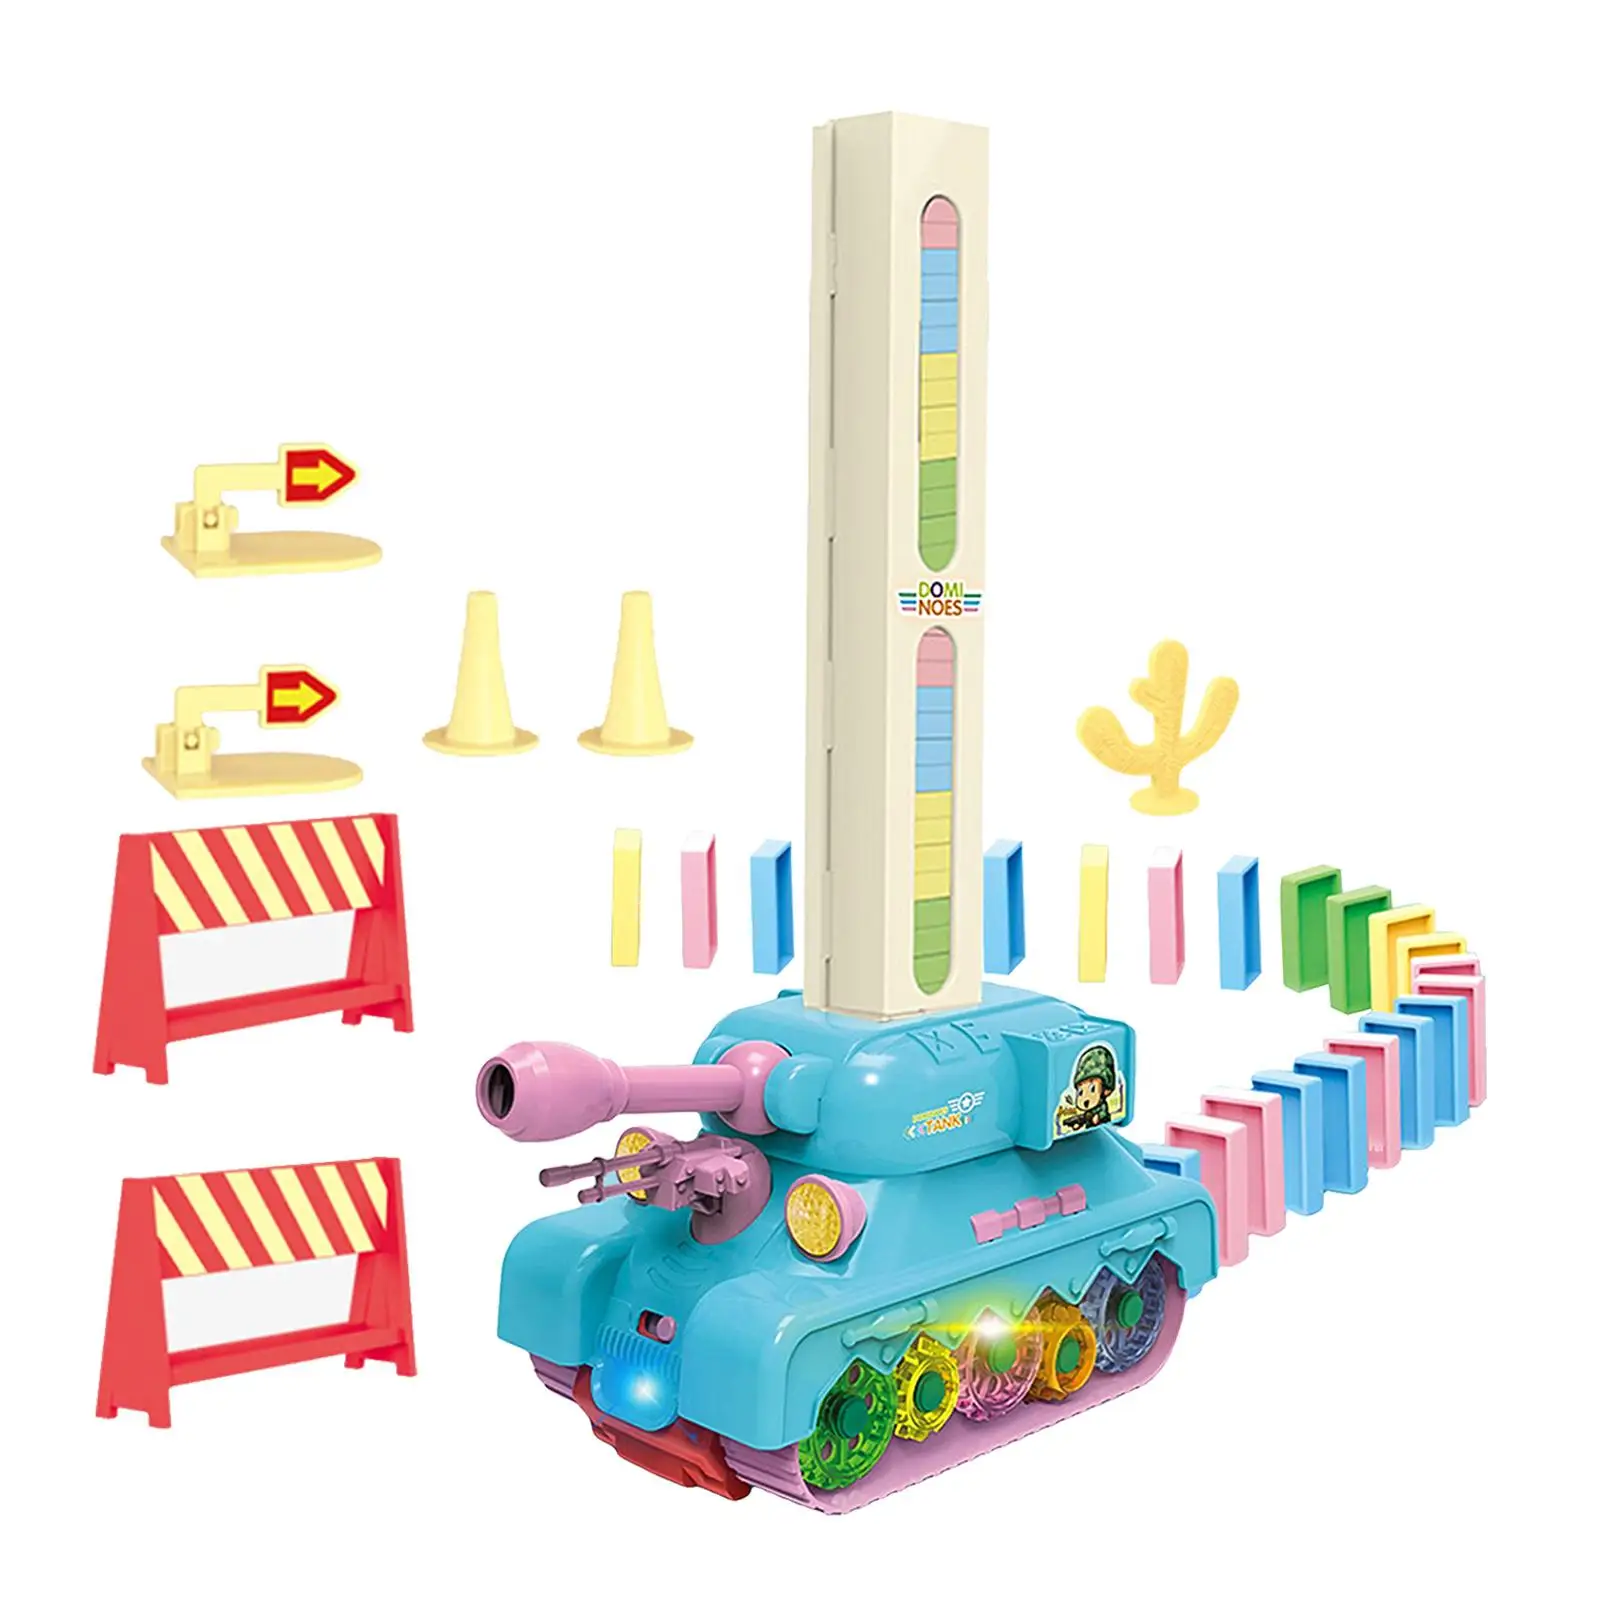 Laying Toy Tank Set Blocks Building Stacking Toy for Children Birthday Gifts